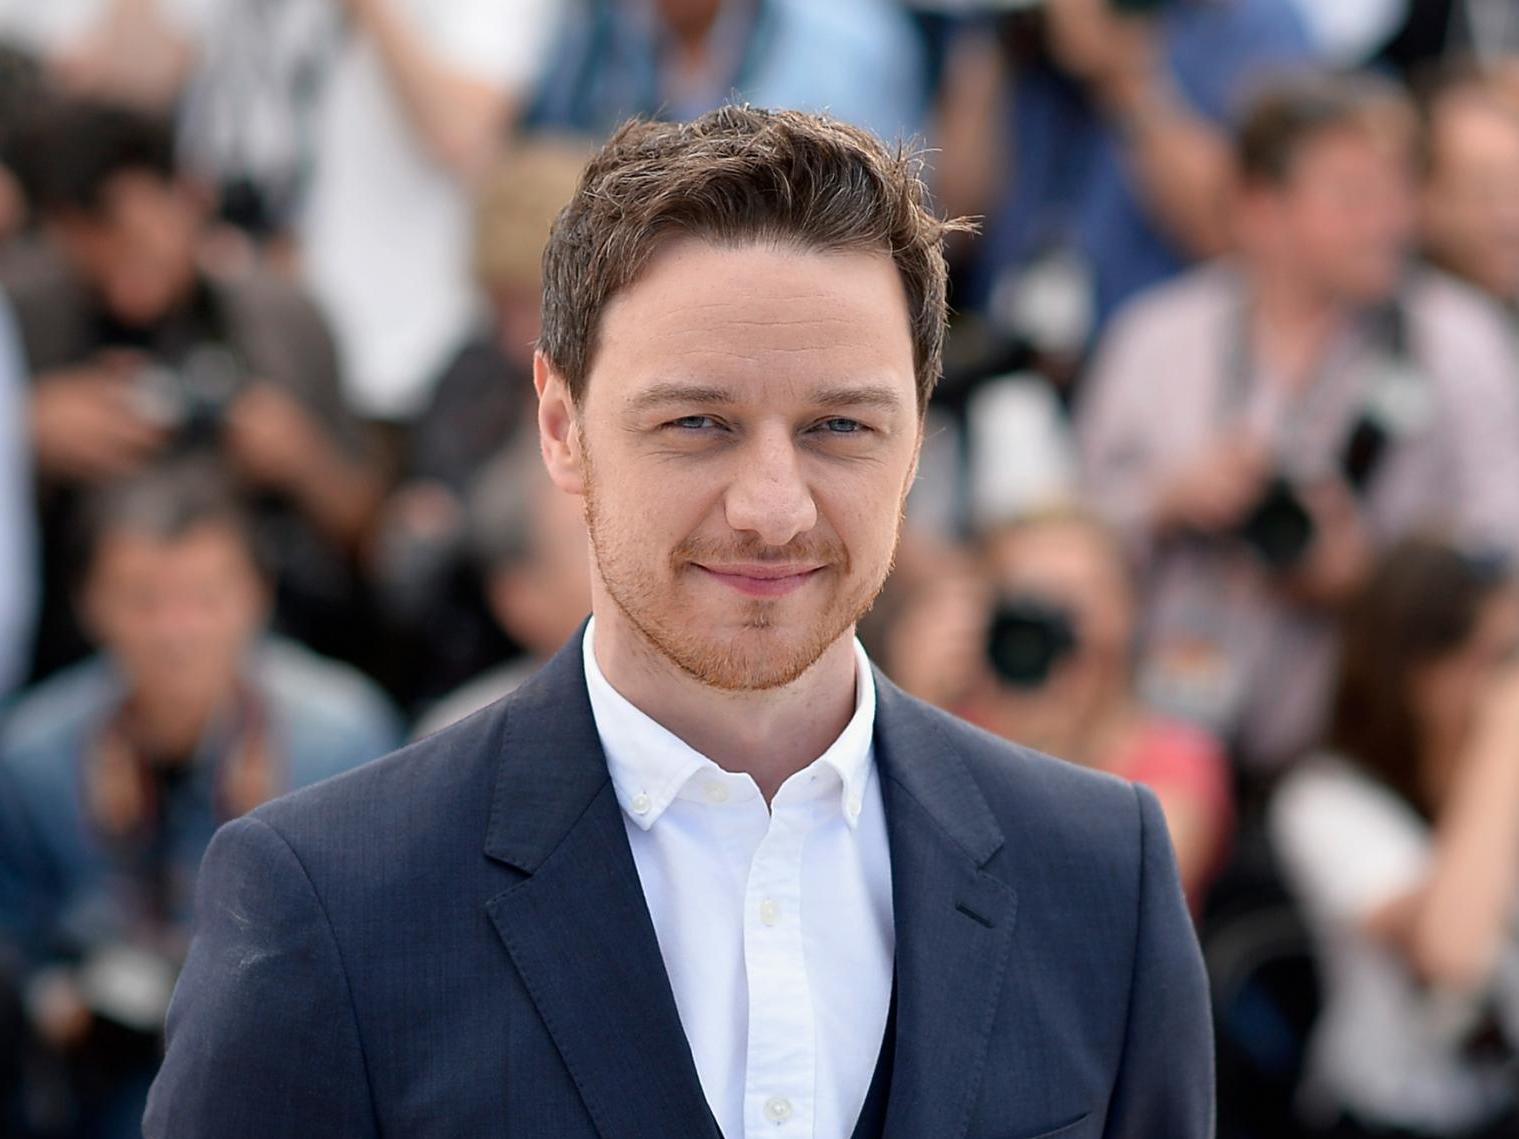 British actor James McAvoy donates 275,000 GBP to buy protective equipment for NHS staff. Image via Independent.